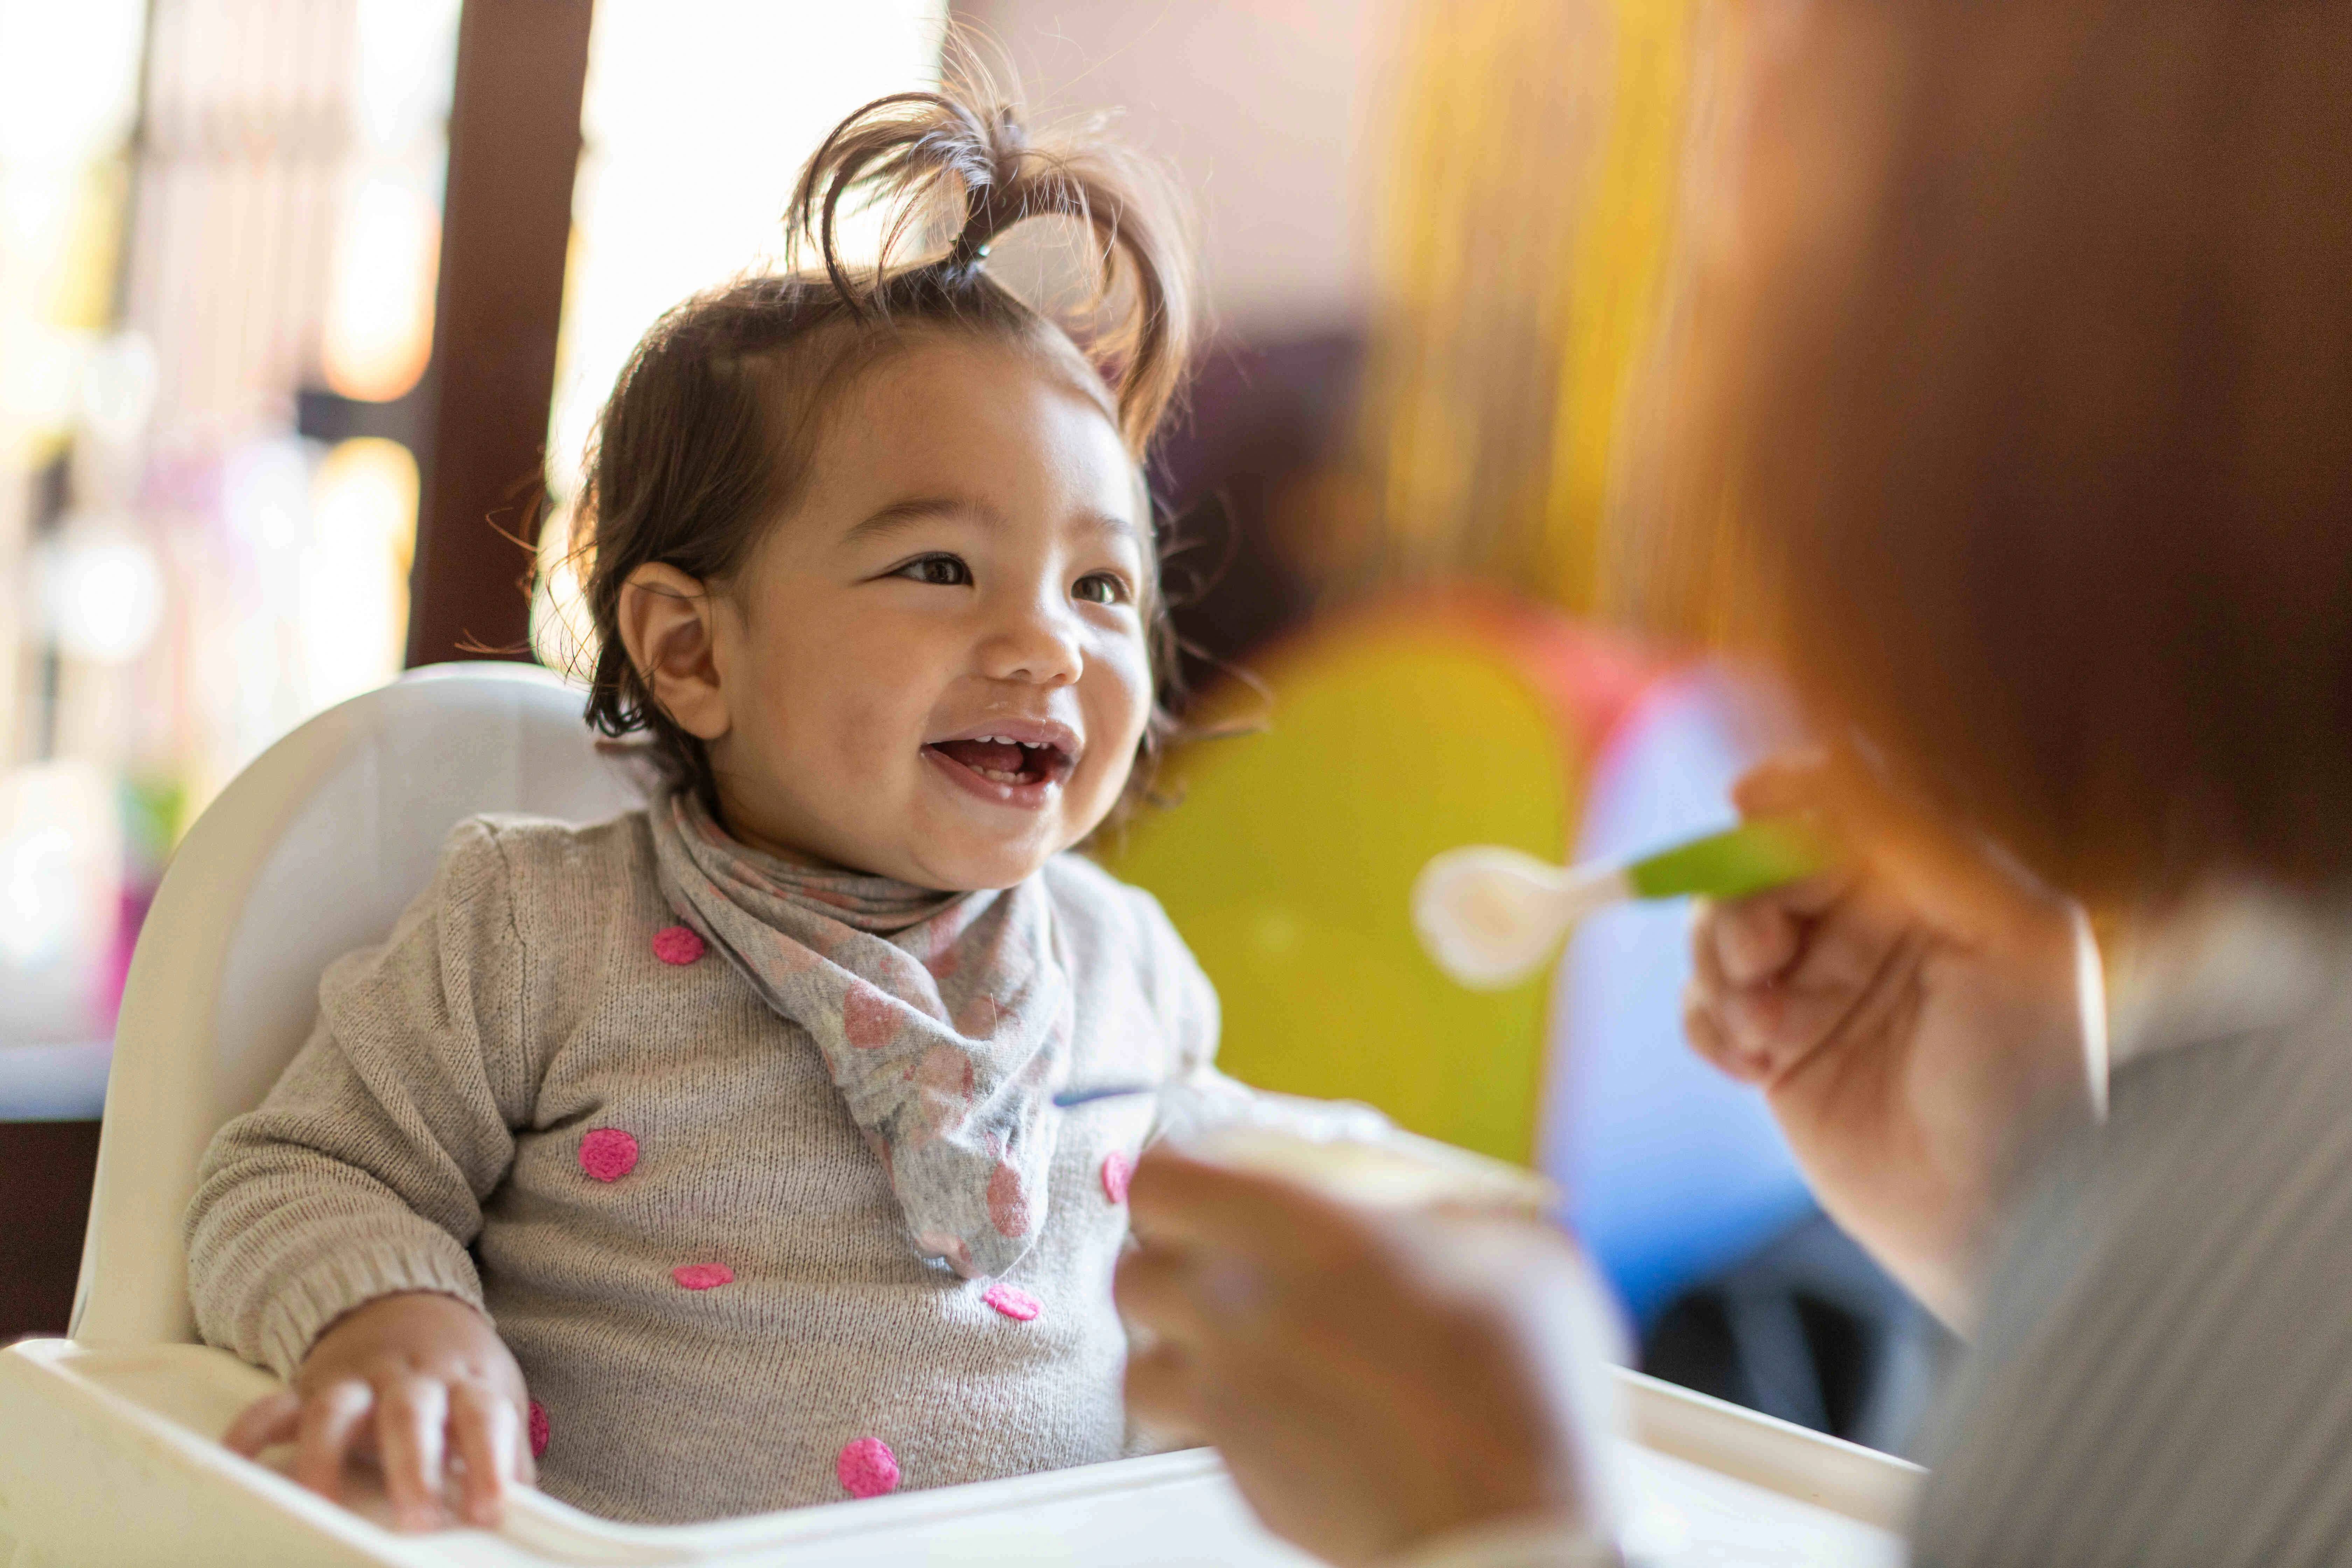 State-licensed home daycares are safe, following stringent childcare regulations while offering affordable care with small class sizes and flexible schedules.